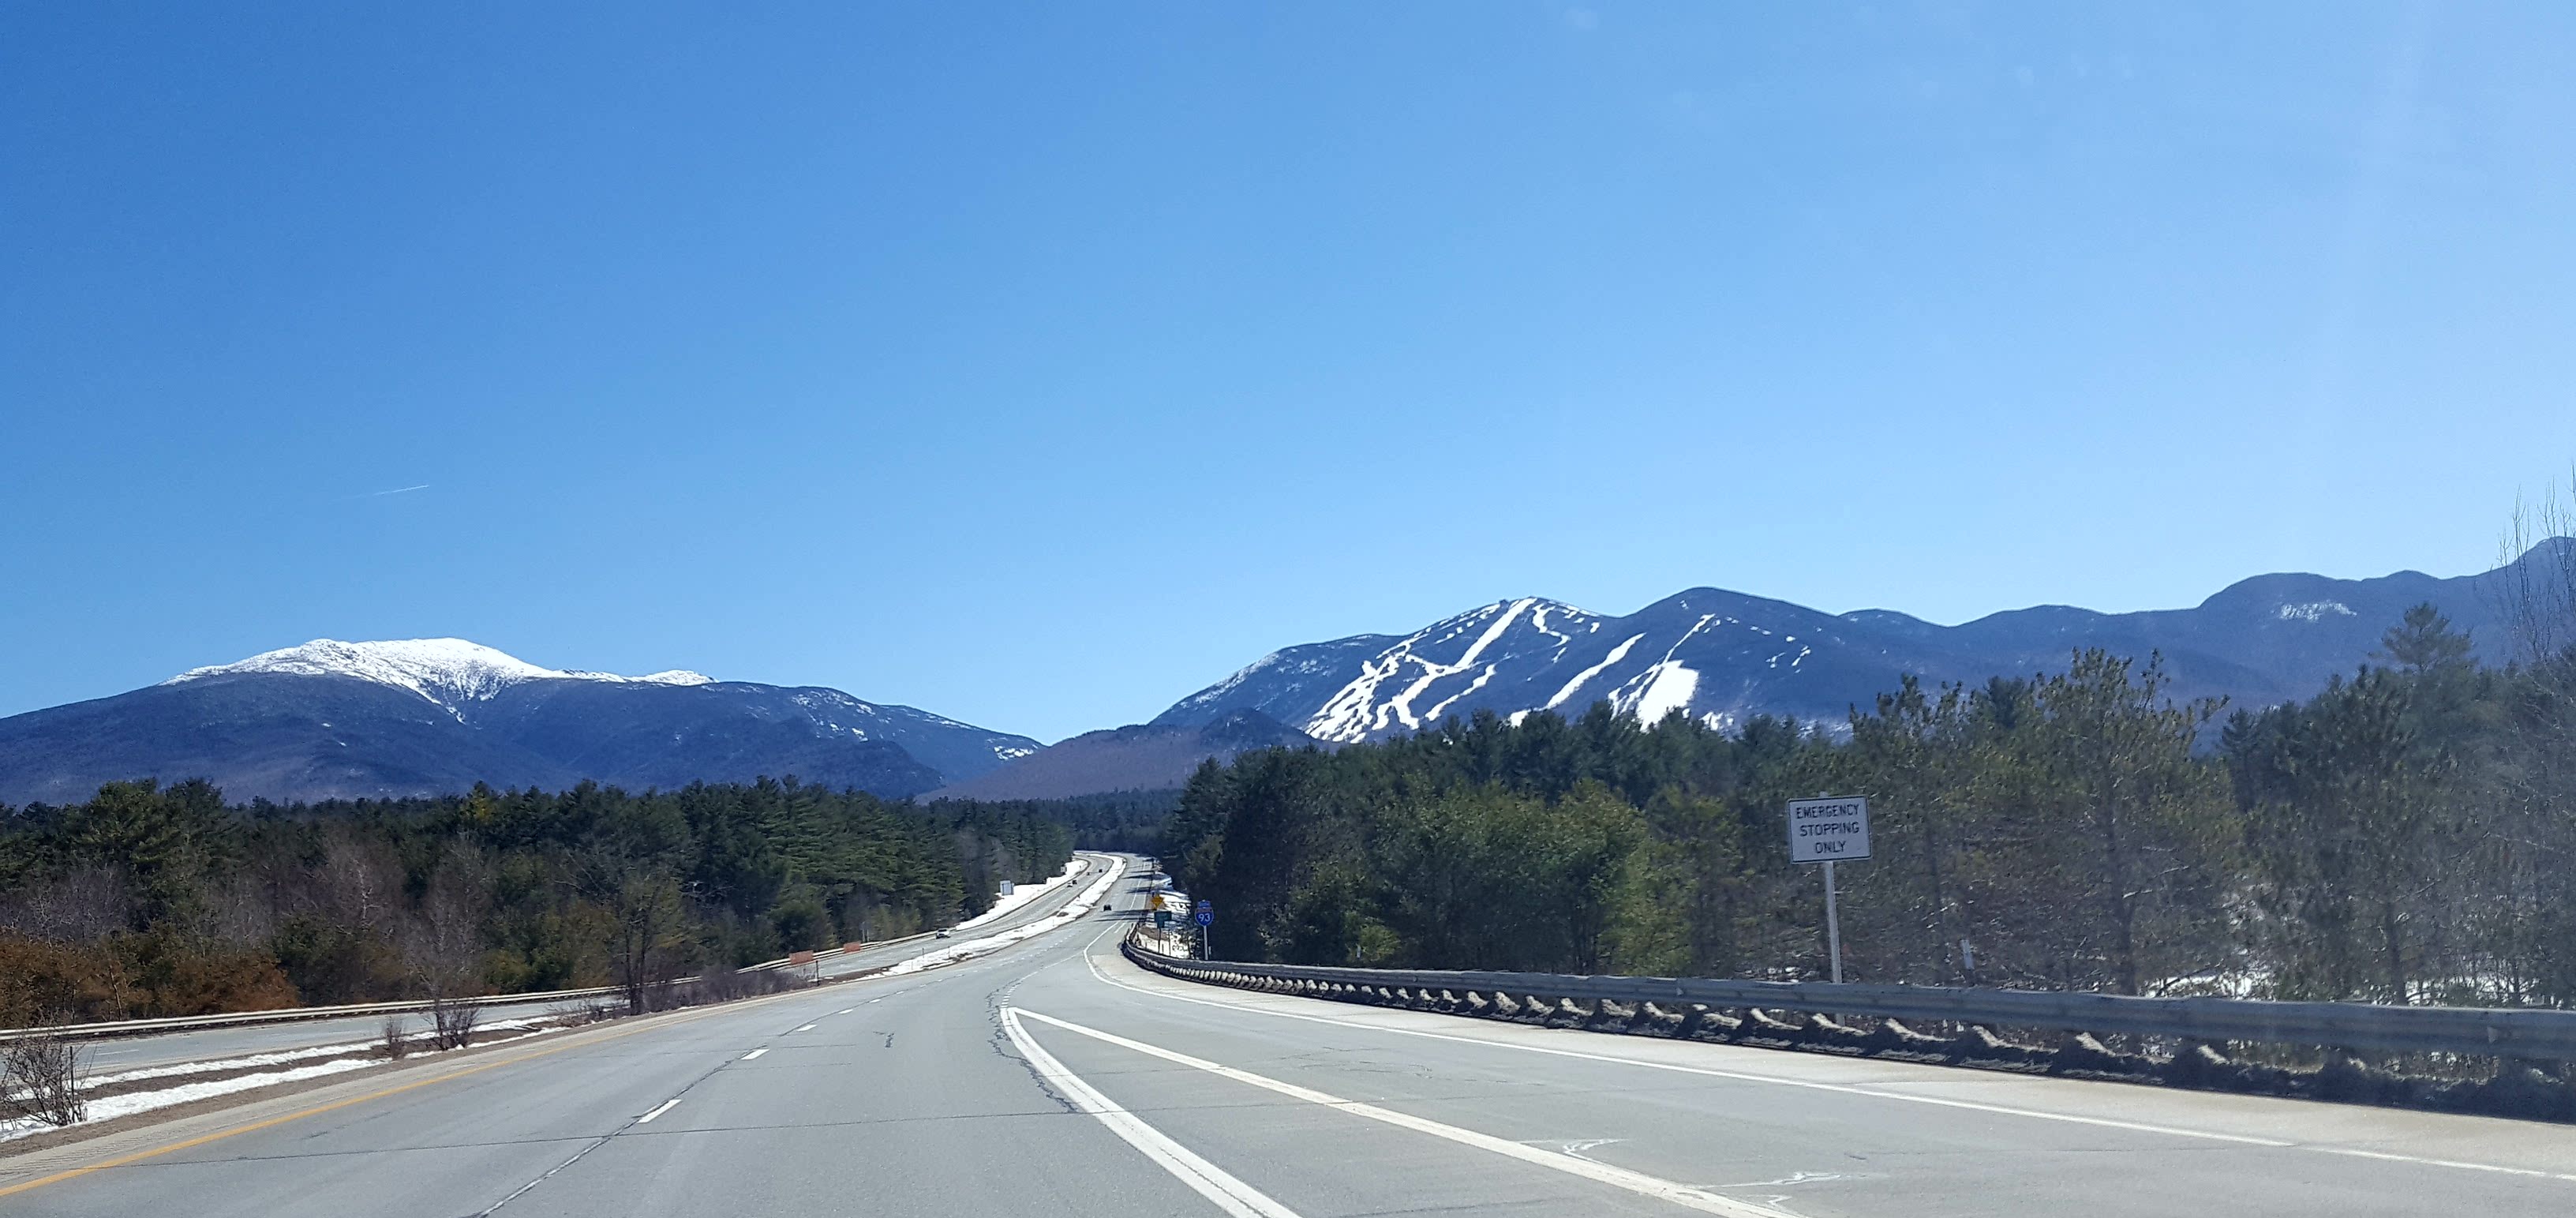 Cannon Mountain from highway.